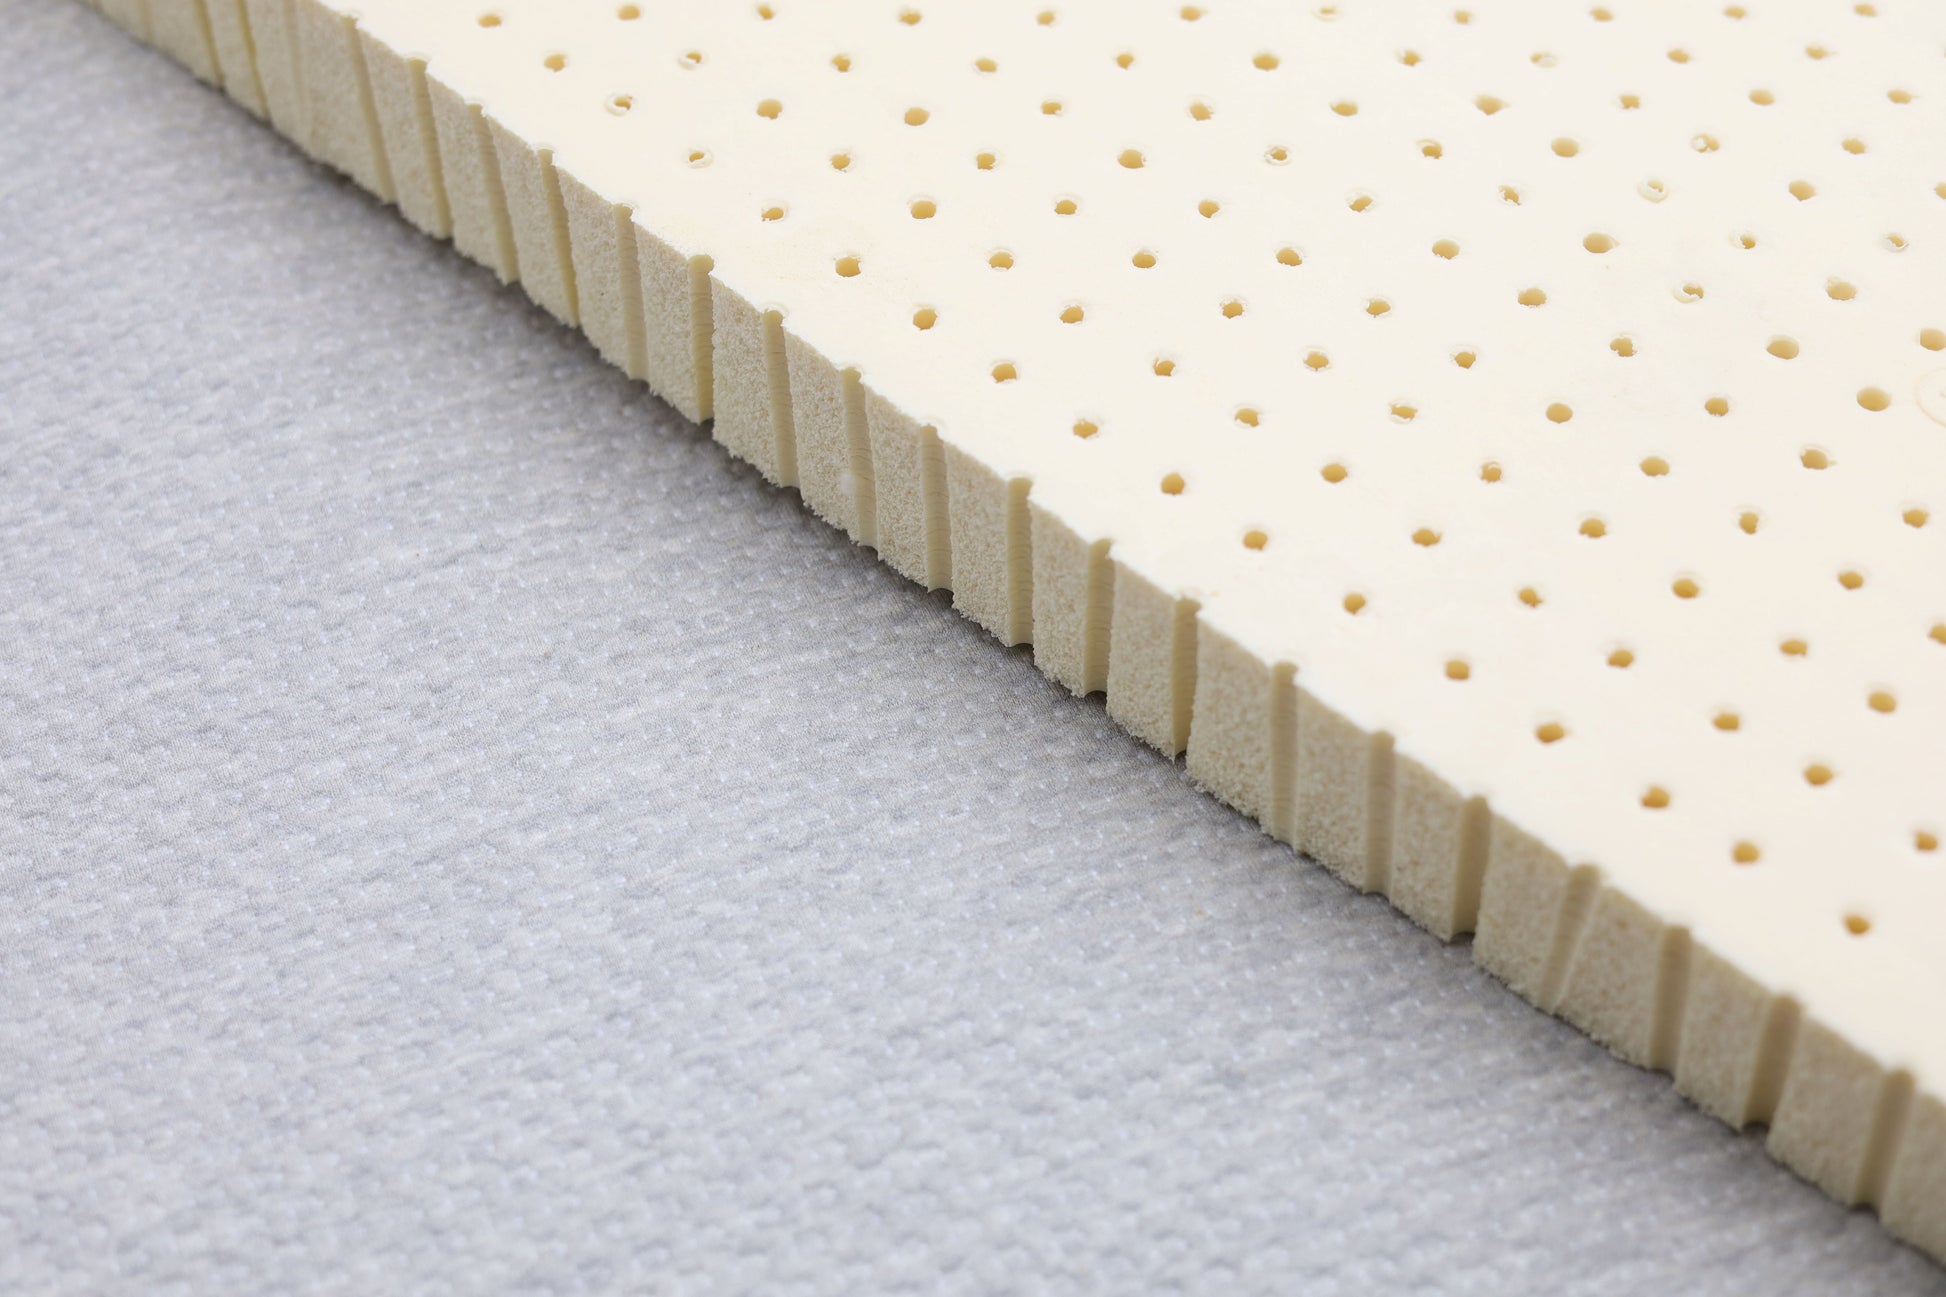 Organic Latex Mattress Topper 3 inch [GOLS Certified] with Heather Grey Organic Cotton Cover - Organic Textiles